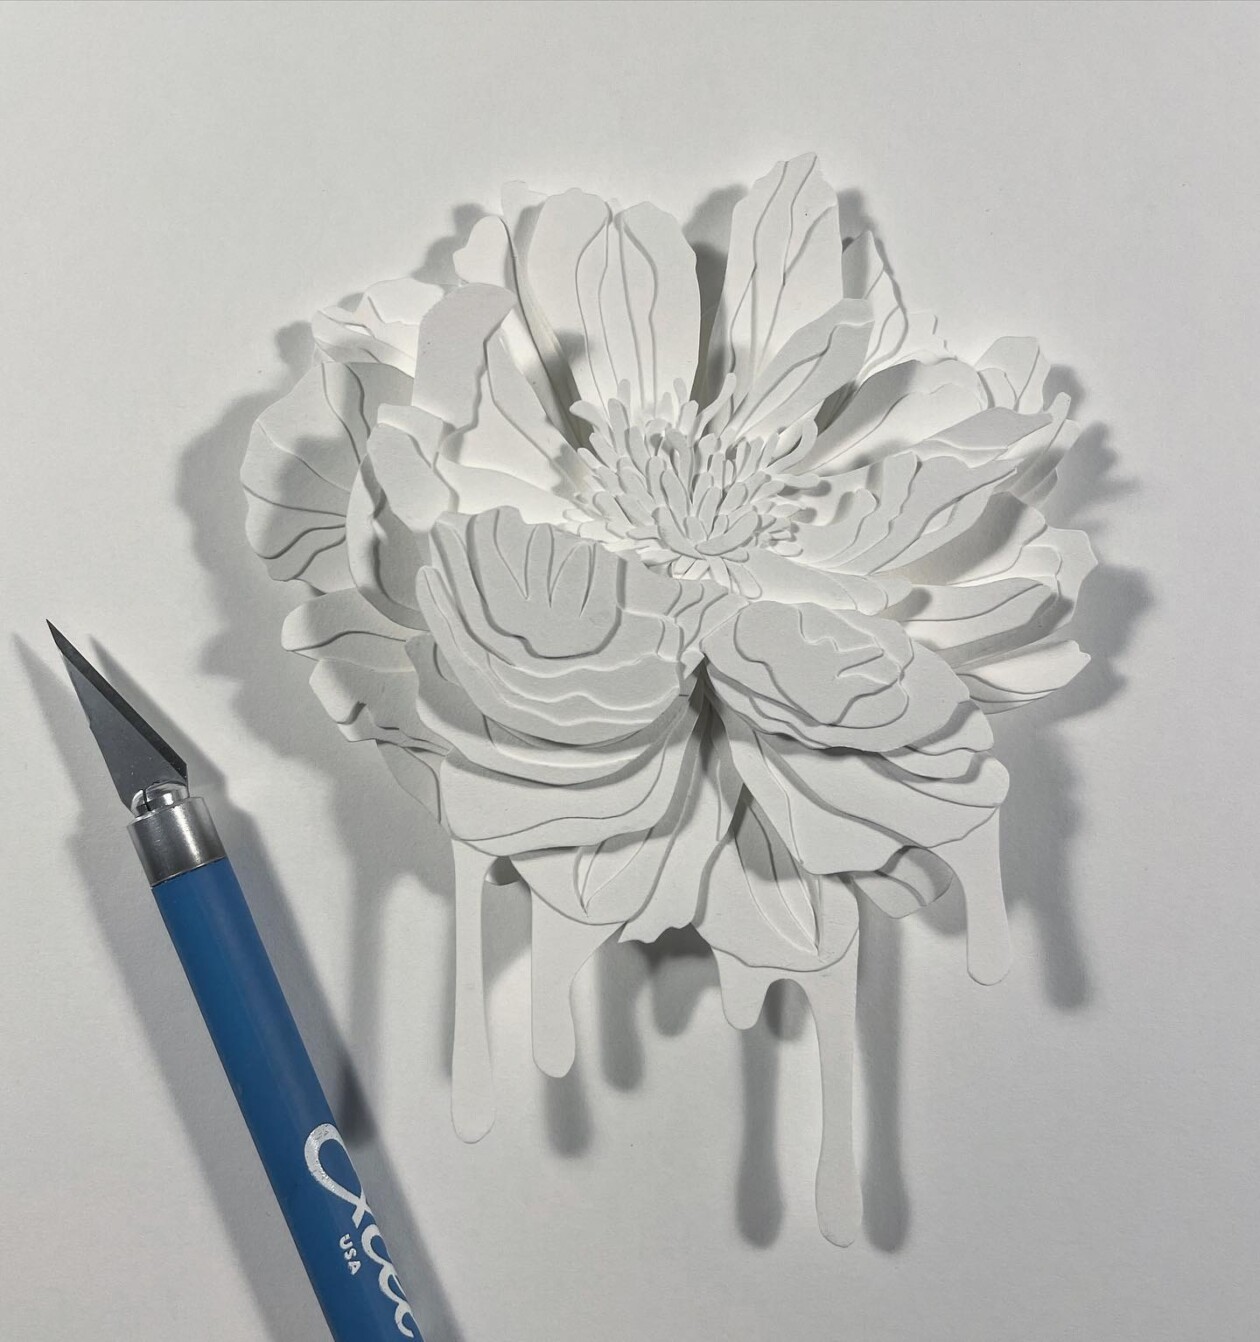 Gorgeously Intricate Floral Paper Cutting Sculptures By Joey Bates (12)